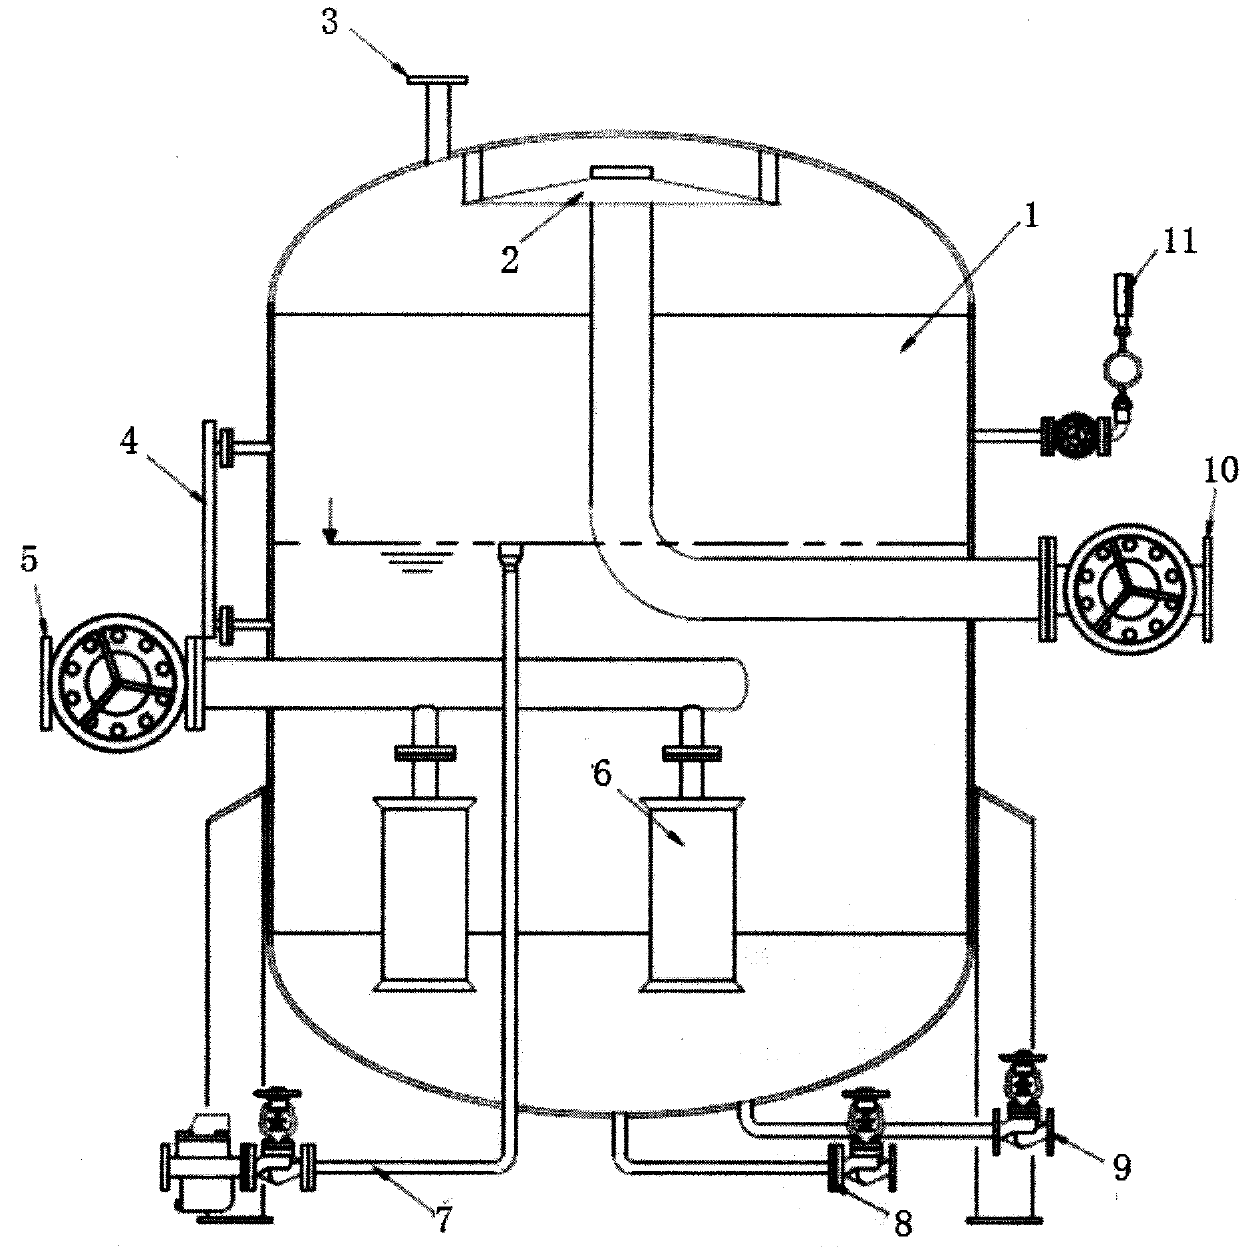 Boiler steam cleaning system